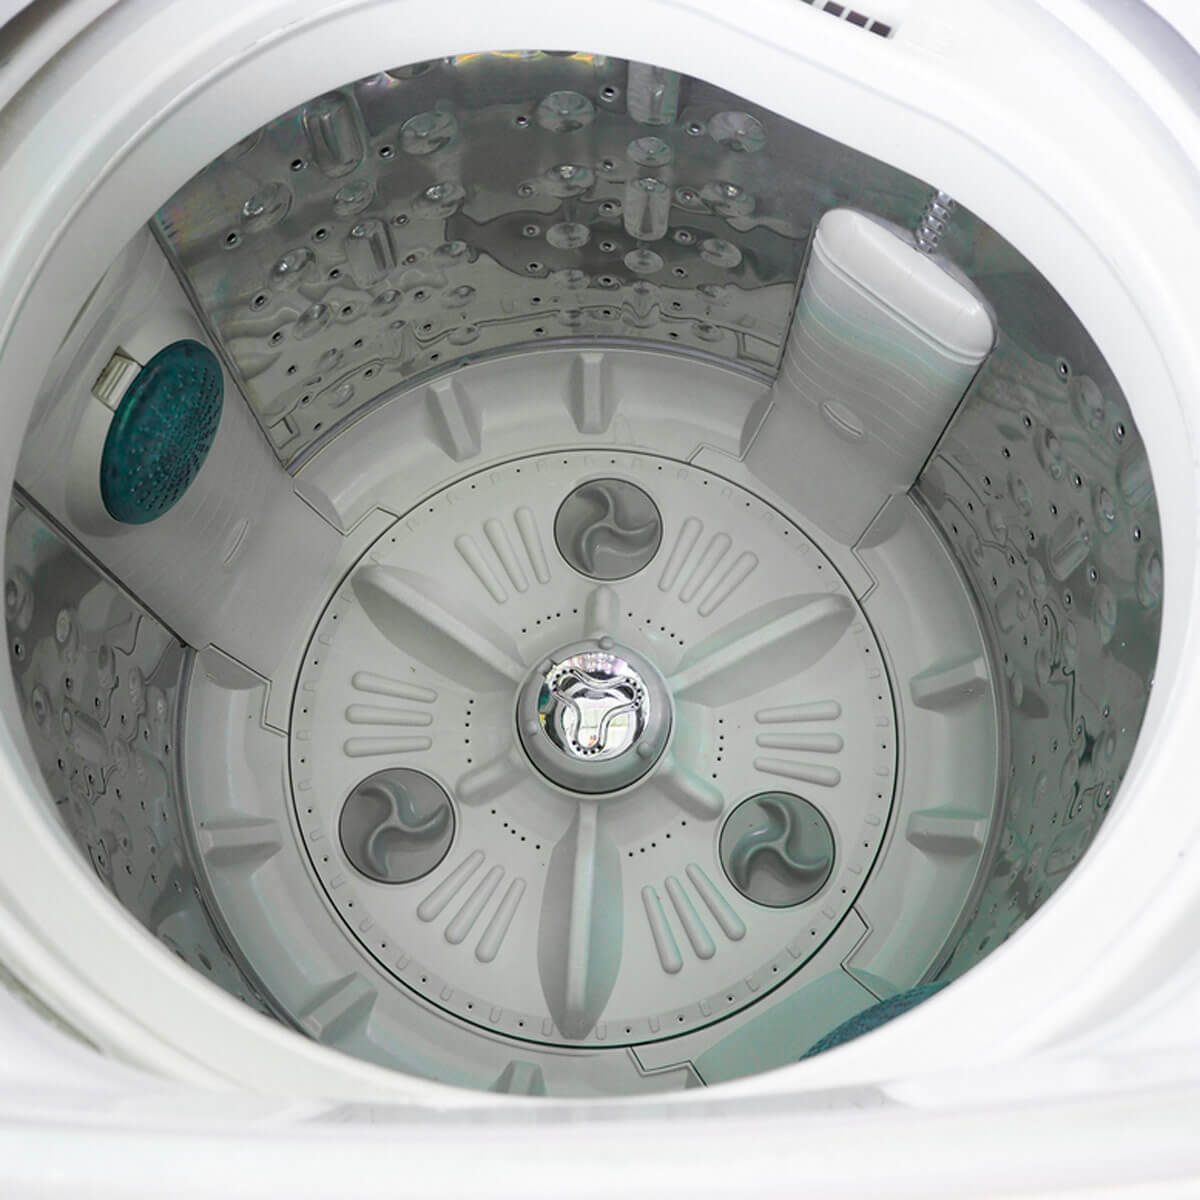 Purpose, Maintenance and Changing the Washer Lint Filter